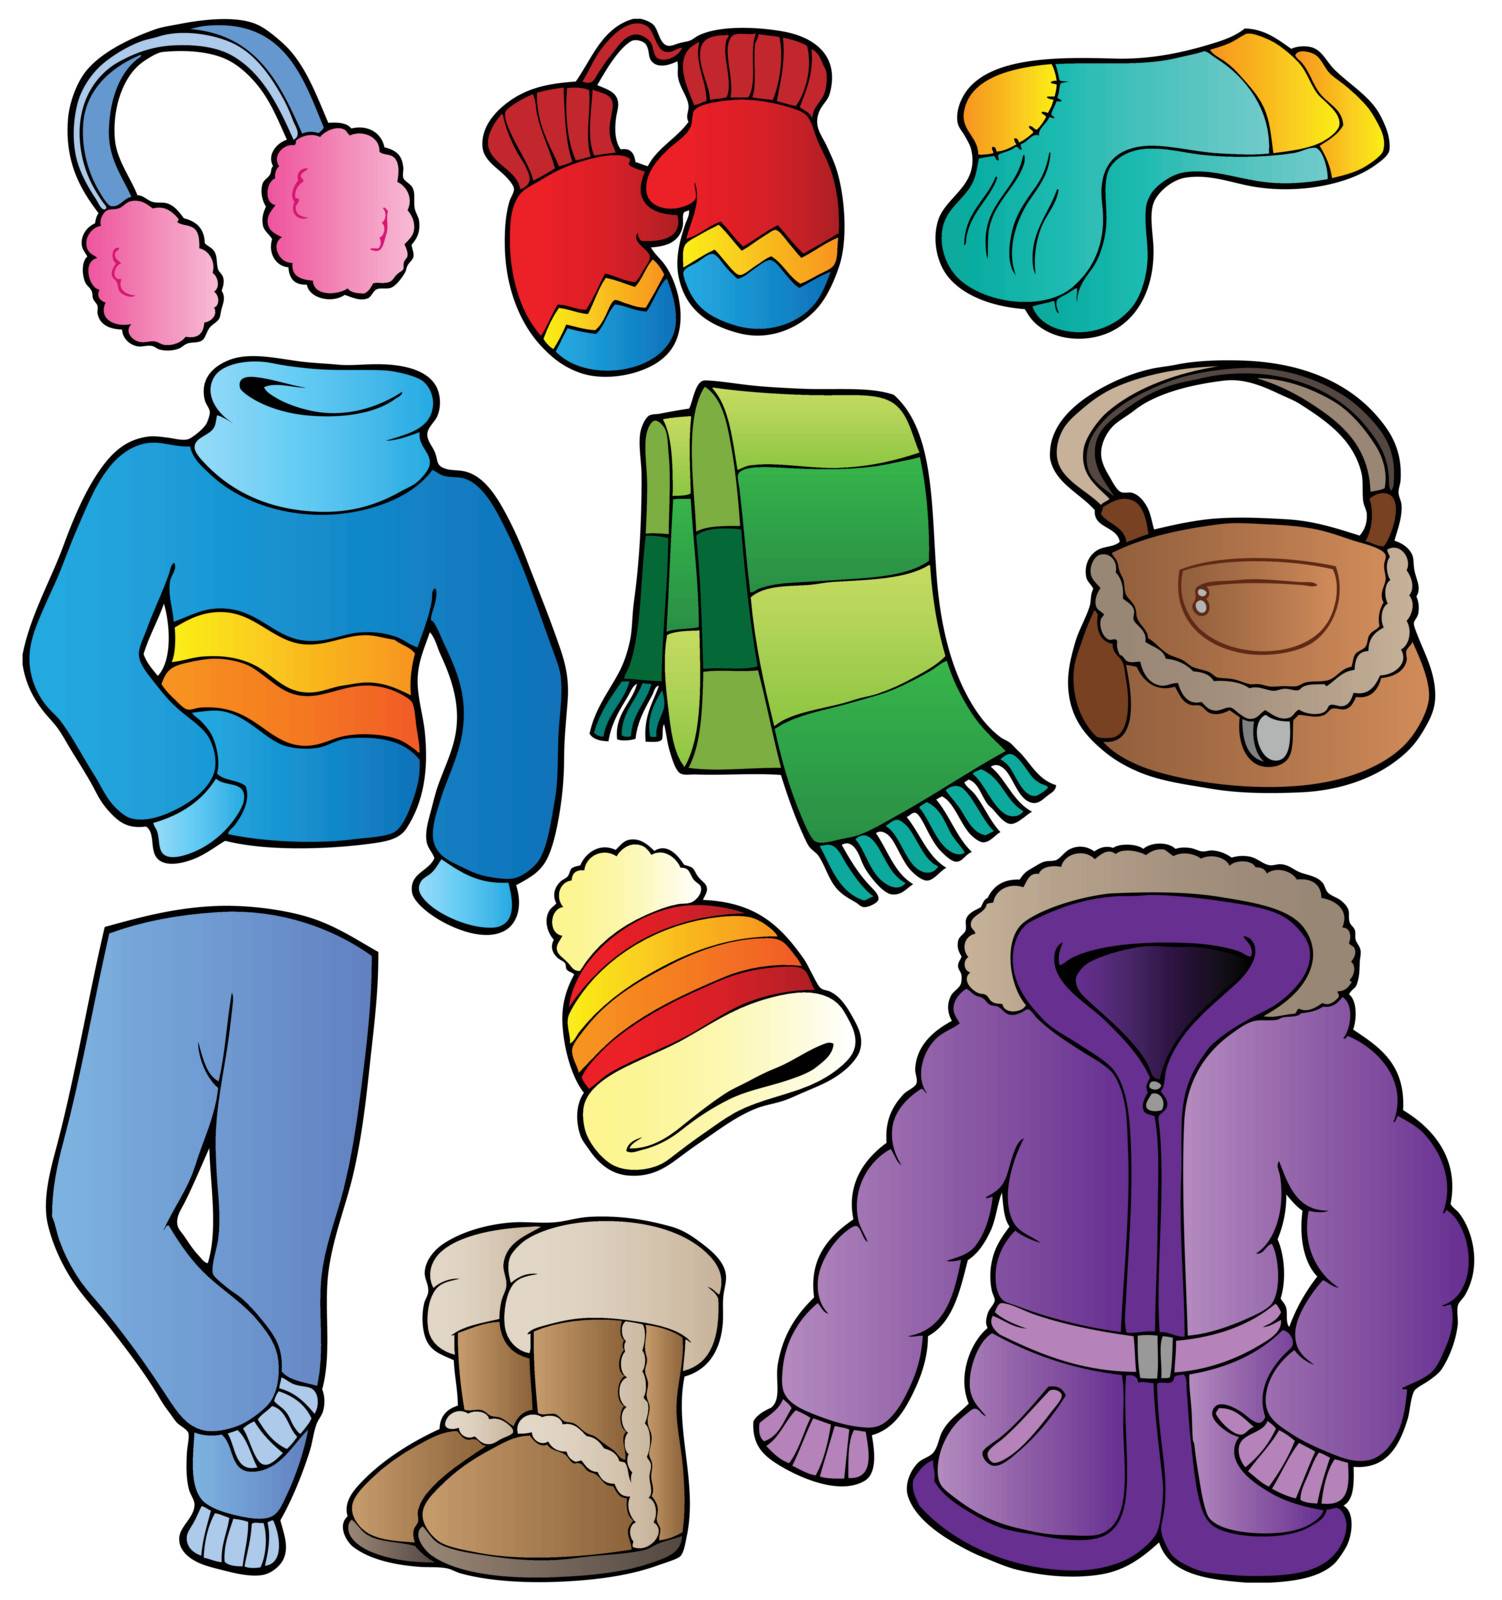 Winter apparel collection 1 - vector illustration.